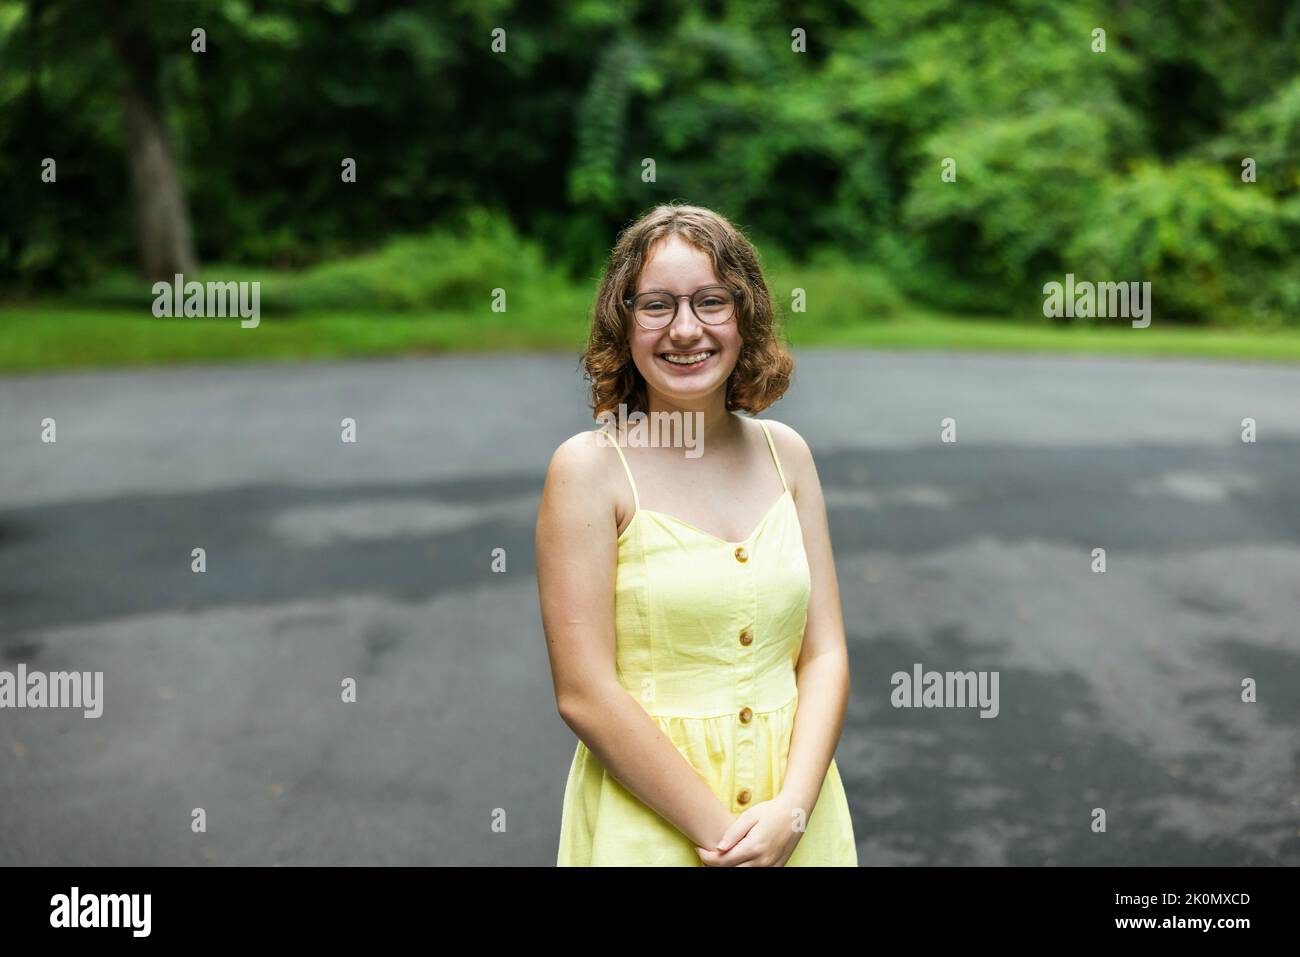 Tween almost teenage girl with braces and wearing a yellow sundress outside in the summer. Stock Photo